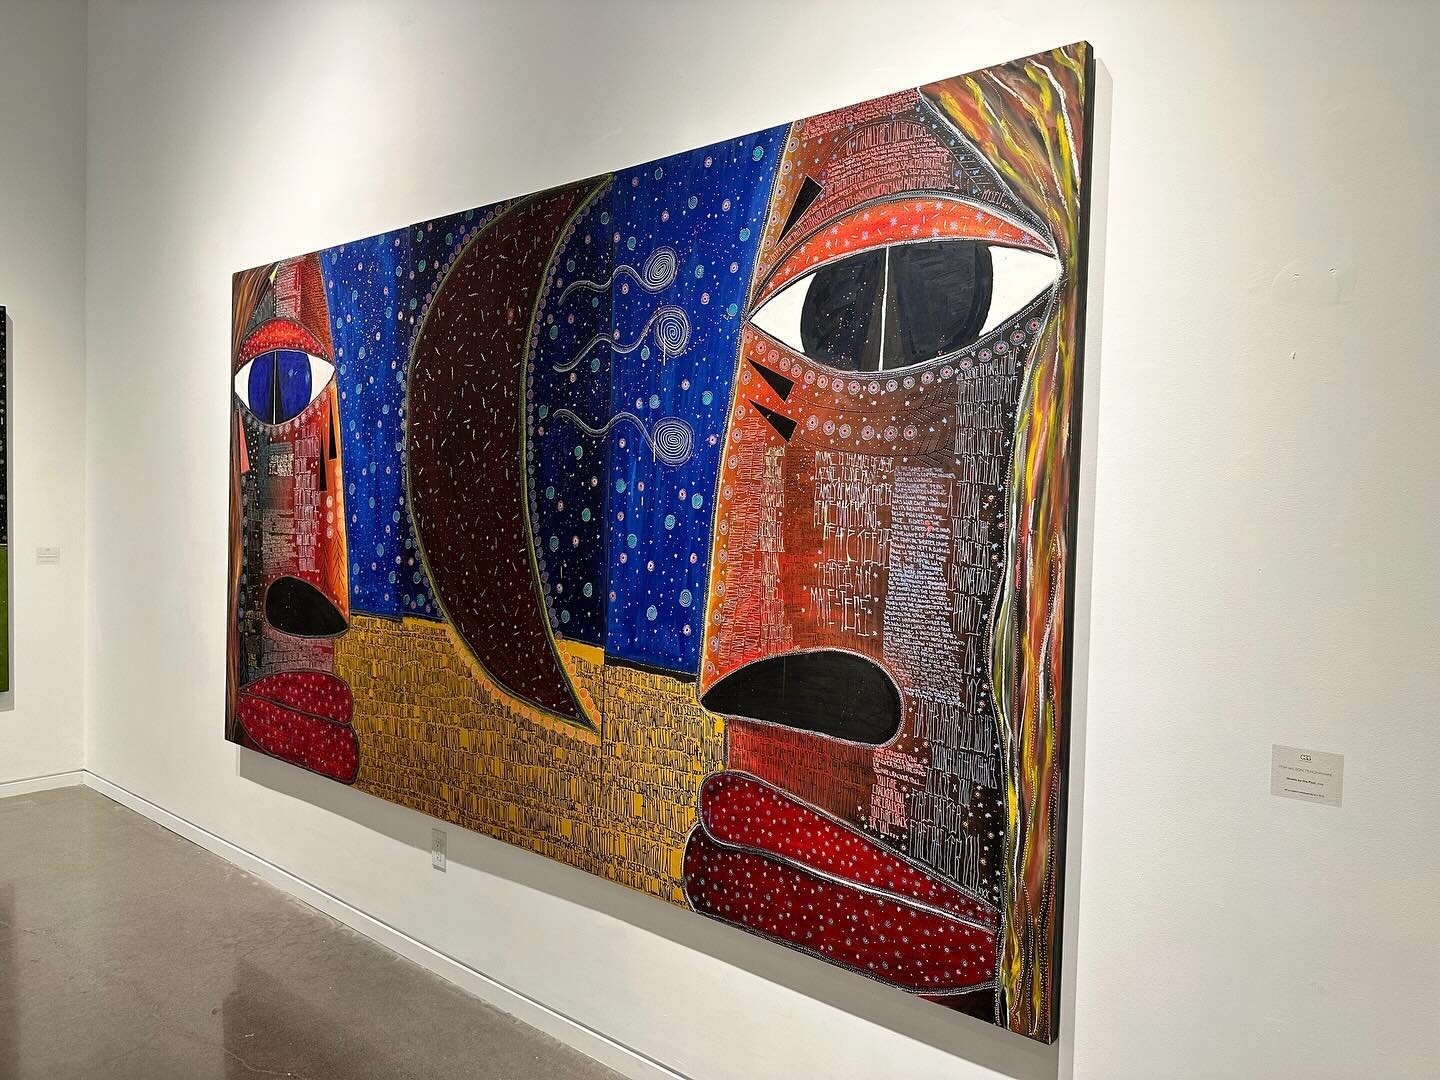 🤩 Stunning exhibition by Tom Wilson Tehoh&aacute;hake at Cultural Goods Gallery, curated by David Liss. The exhibit explores the personal story of Juno Award-winning singer, songwriter, musician and performer, with a selection of works, 2015 and 202